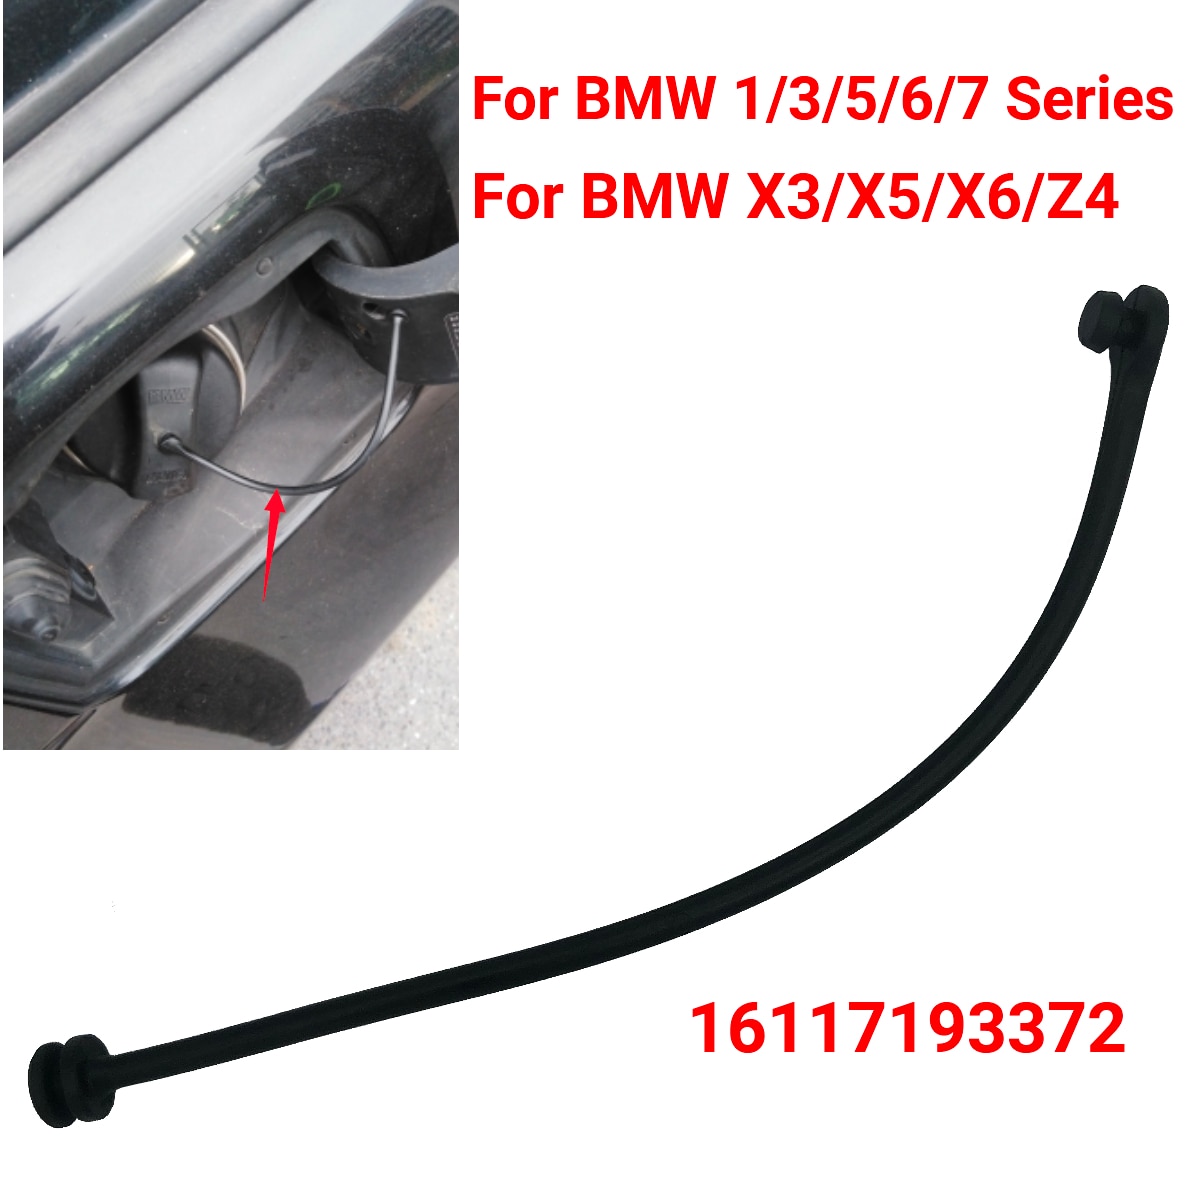 Fuel Cap Tank Cover Line Cable Wire Petrol Diesel 16117193372 For BMW E87 E88 E46 E90 E91 E92 E93 E39 E60 E63 E64 E65 E66 X3 X5